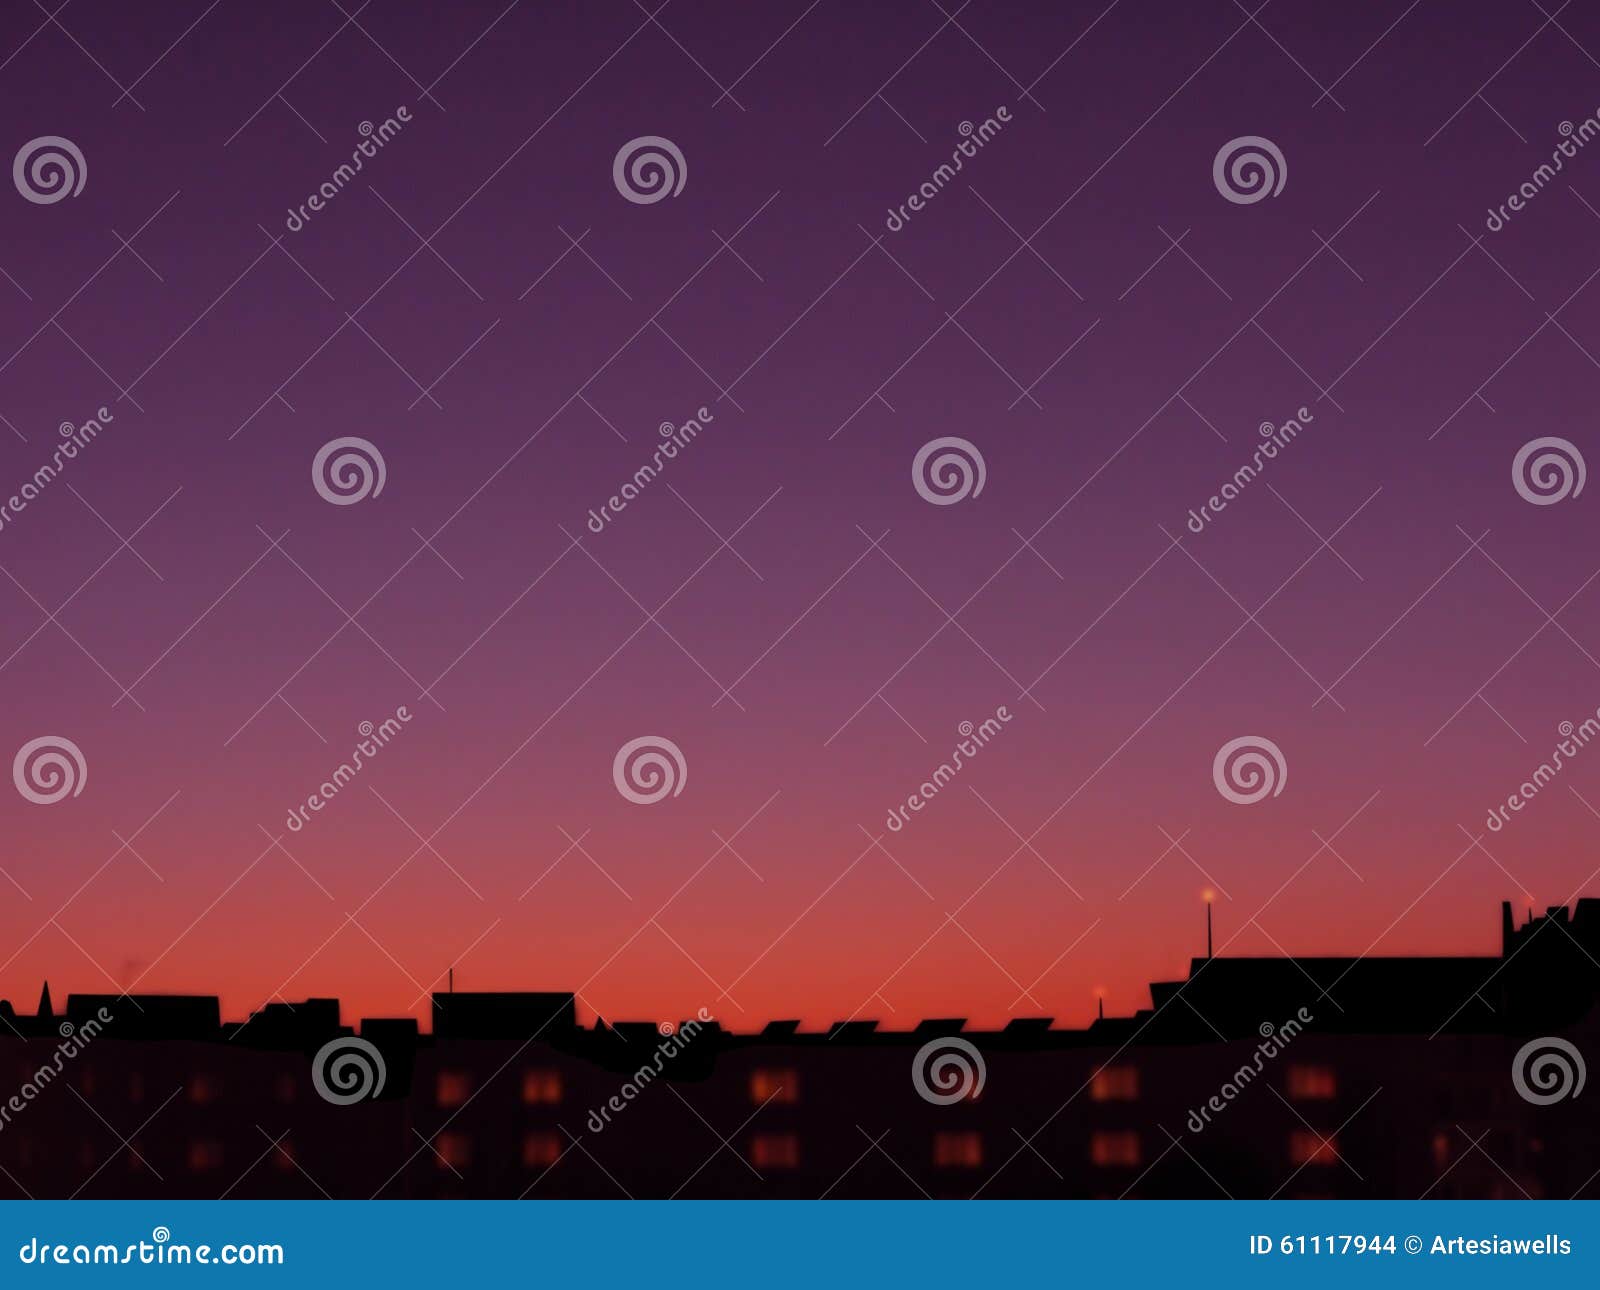 Fantasy skyline city stock photo. Image of abstract, buildigns - 61117944